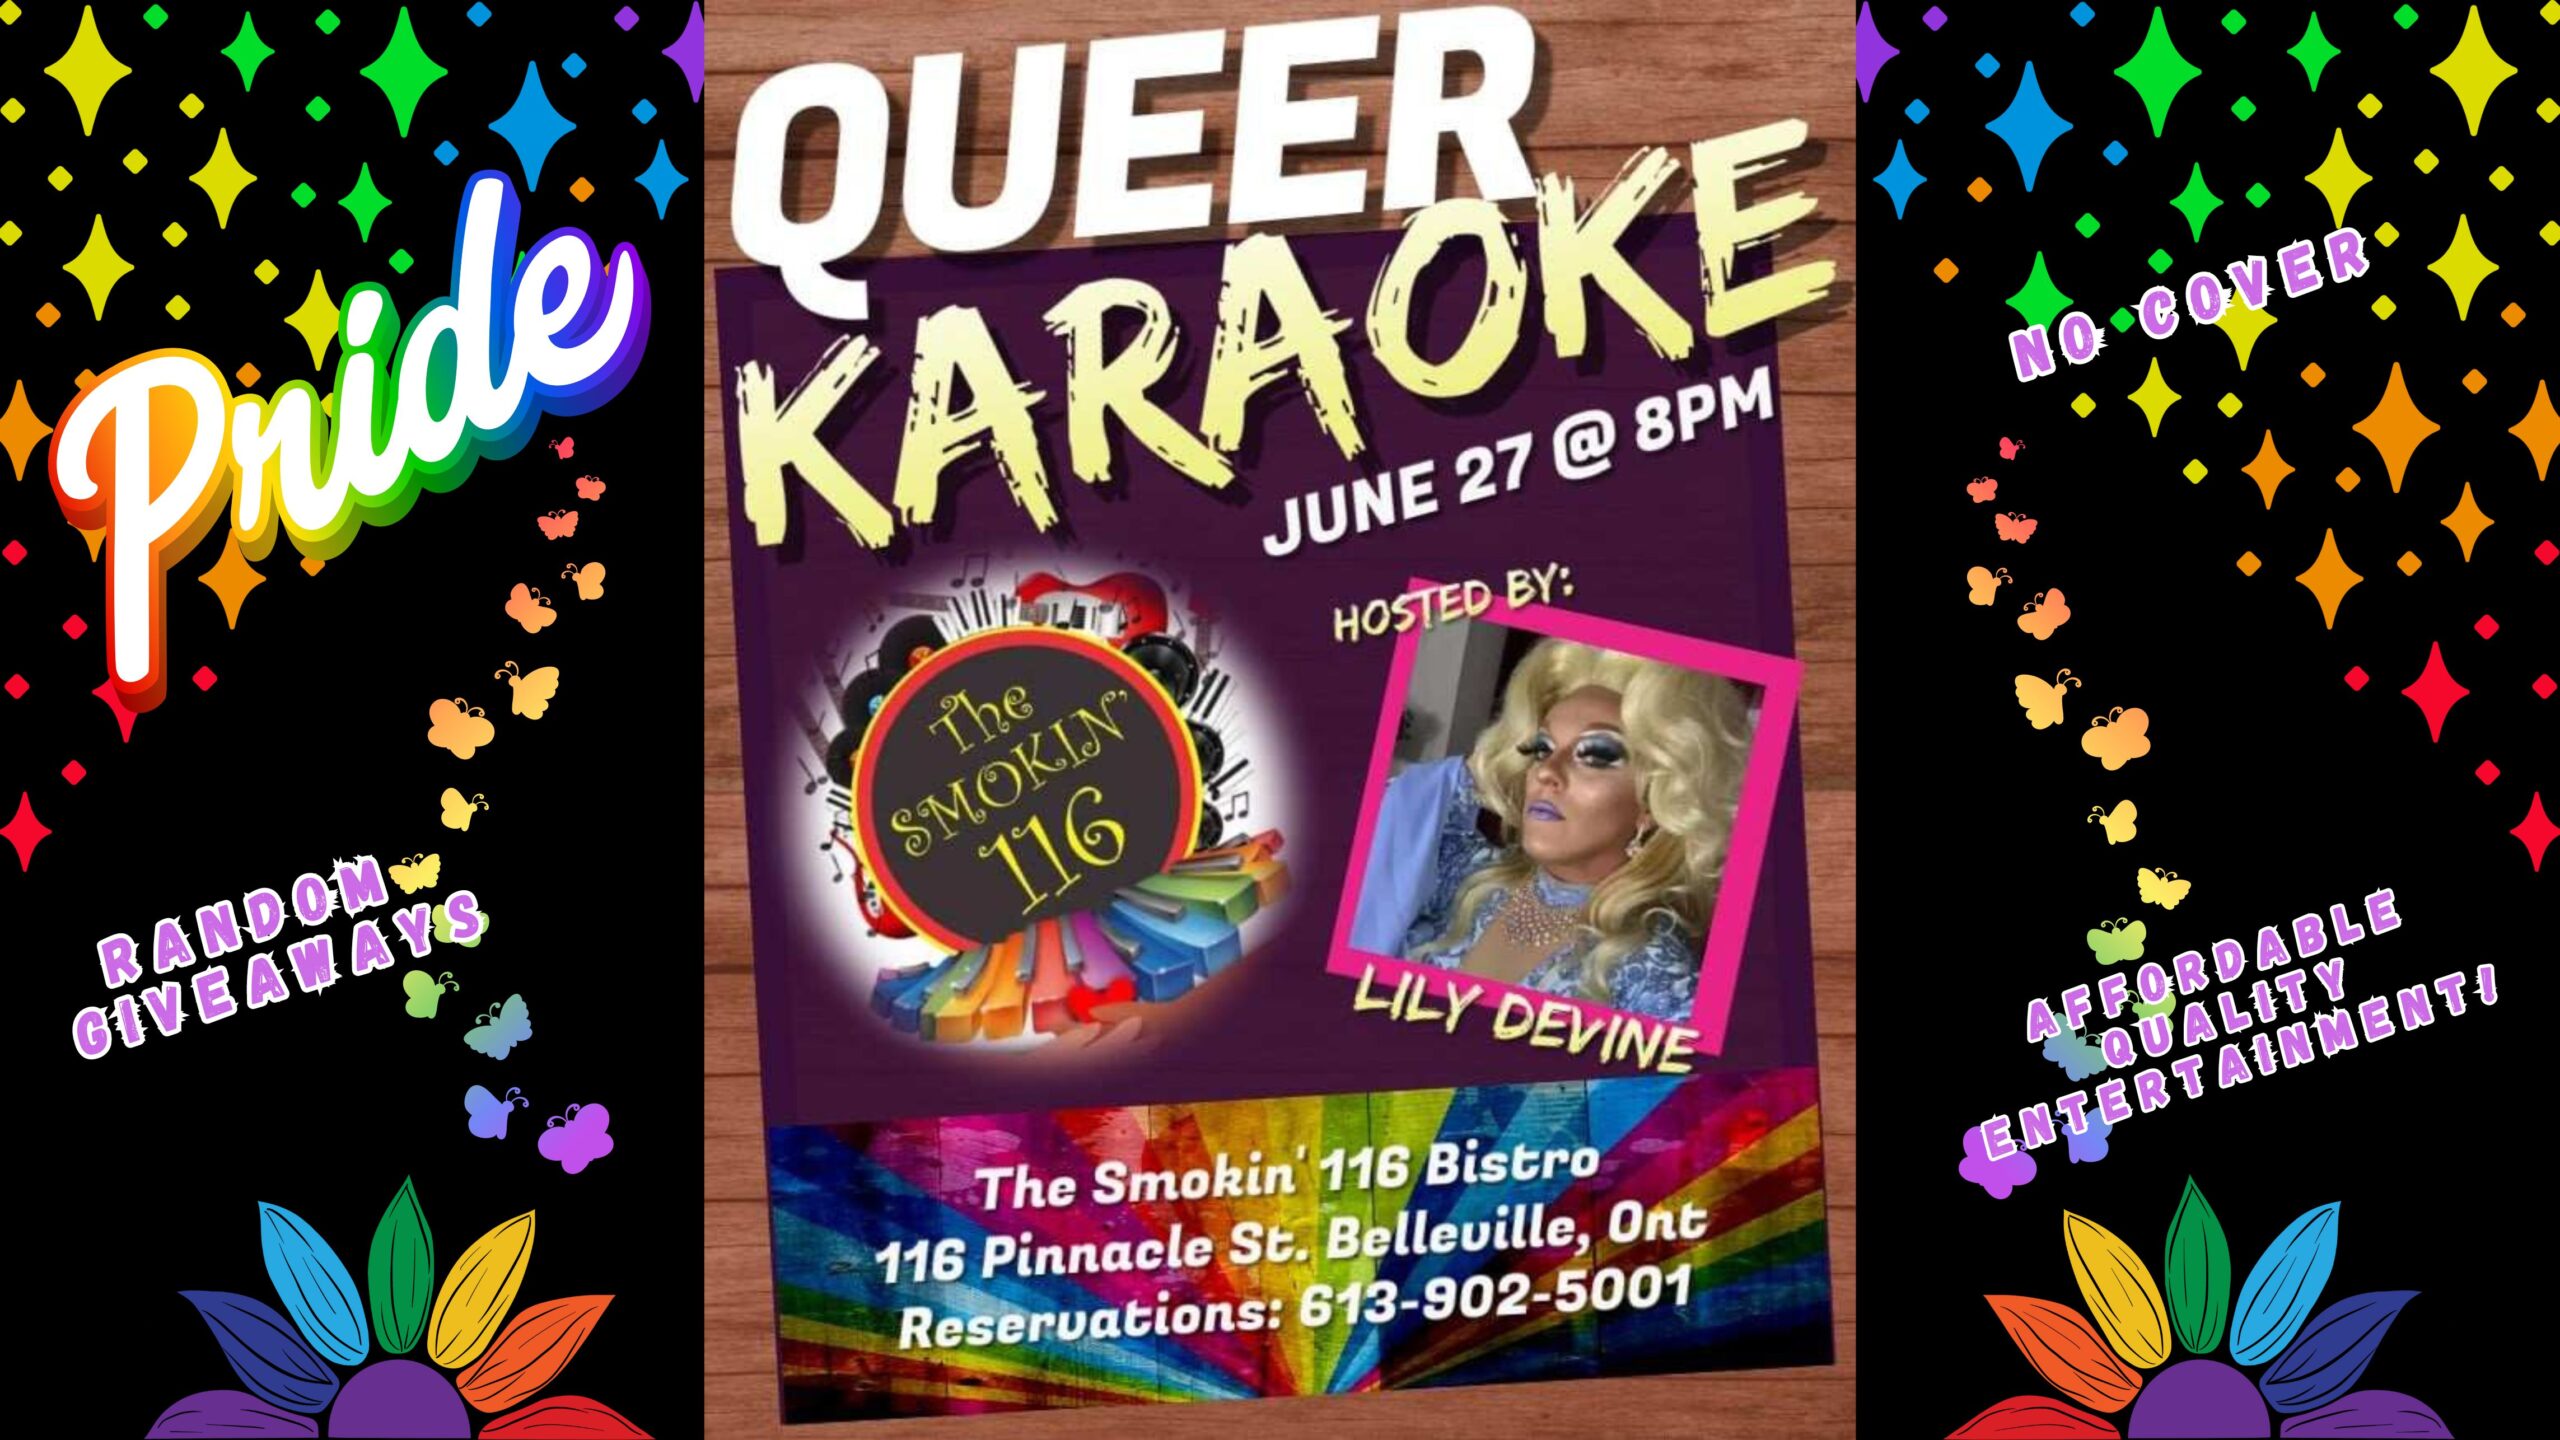 Poster for event with photo of performer and information. Titled "Queer Karaoke"